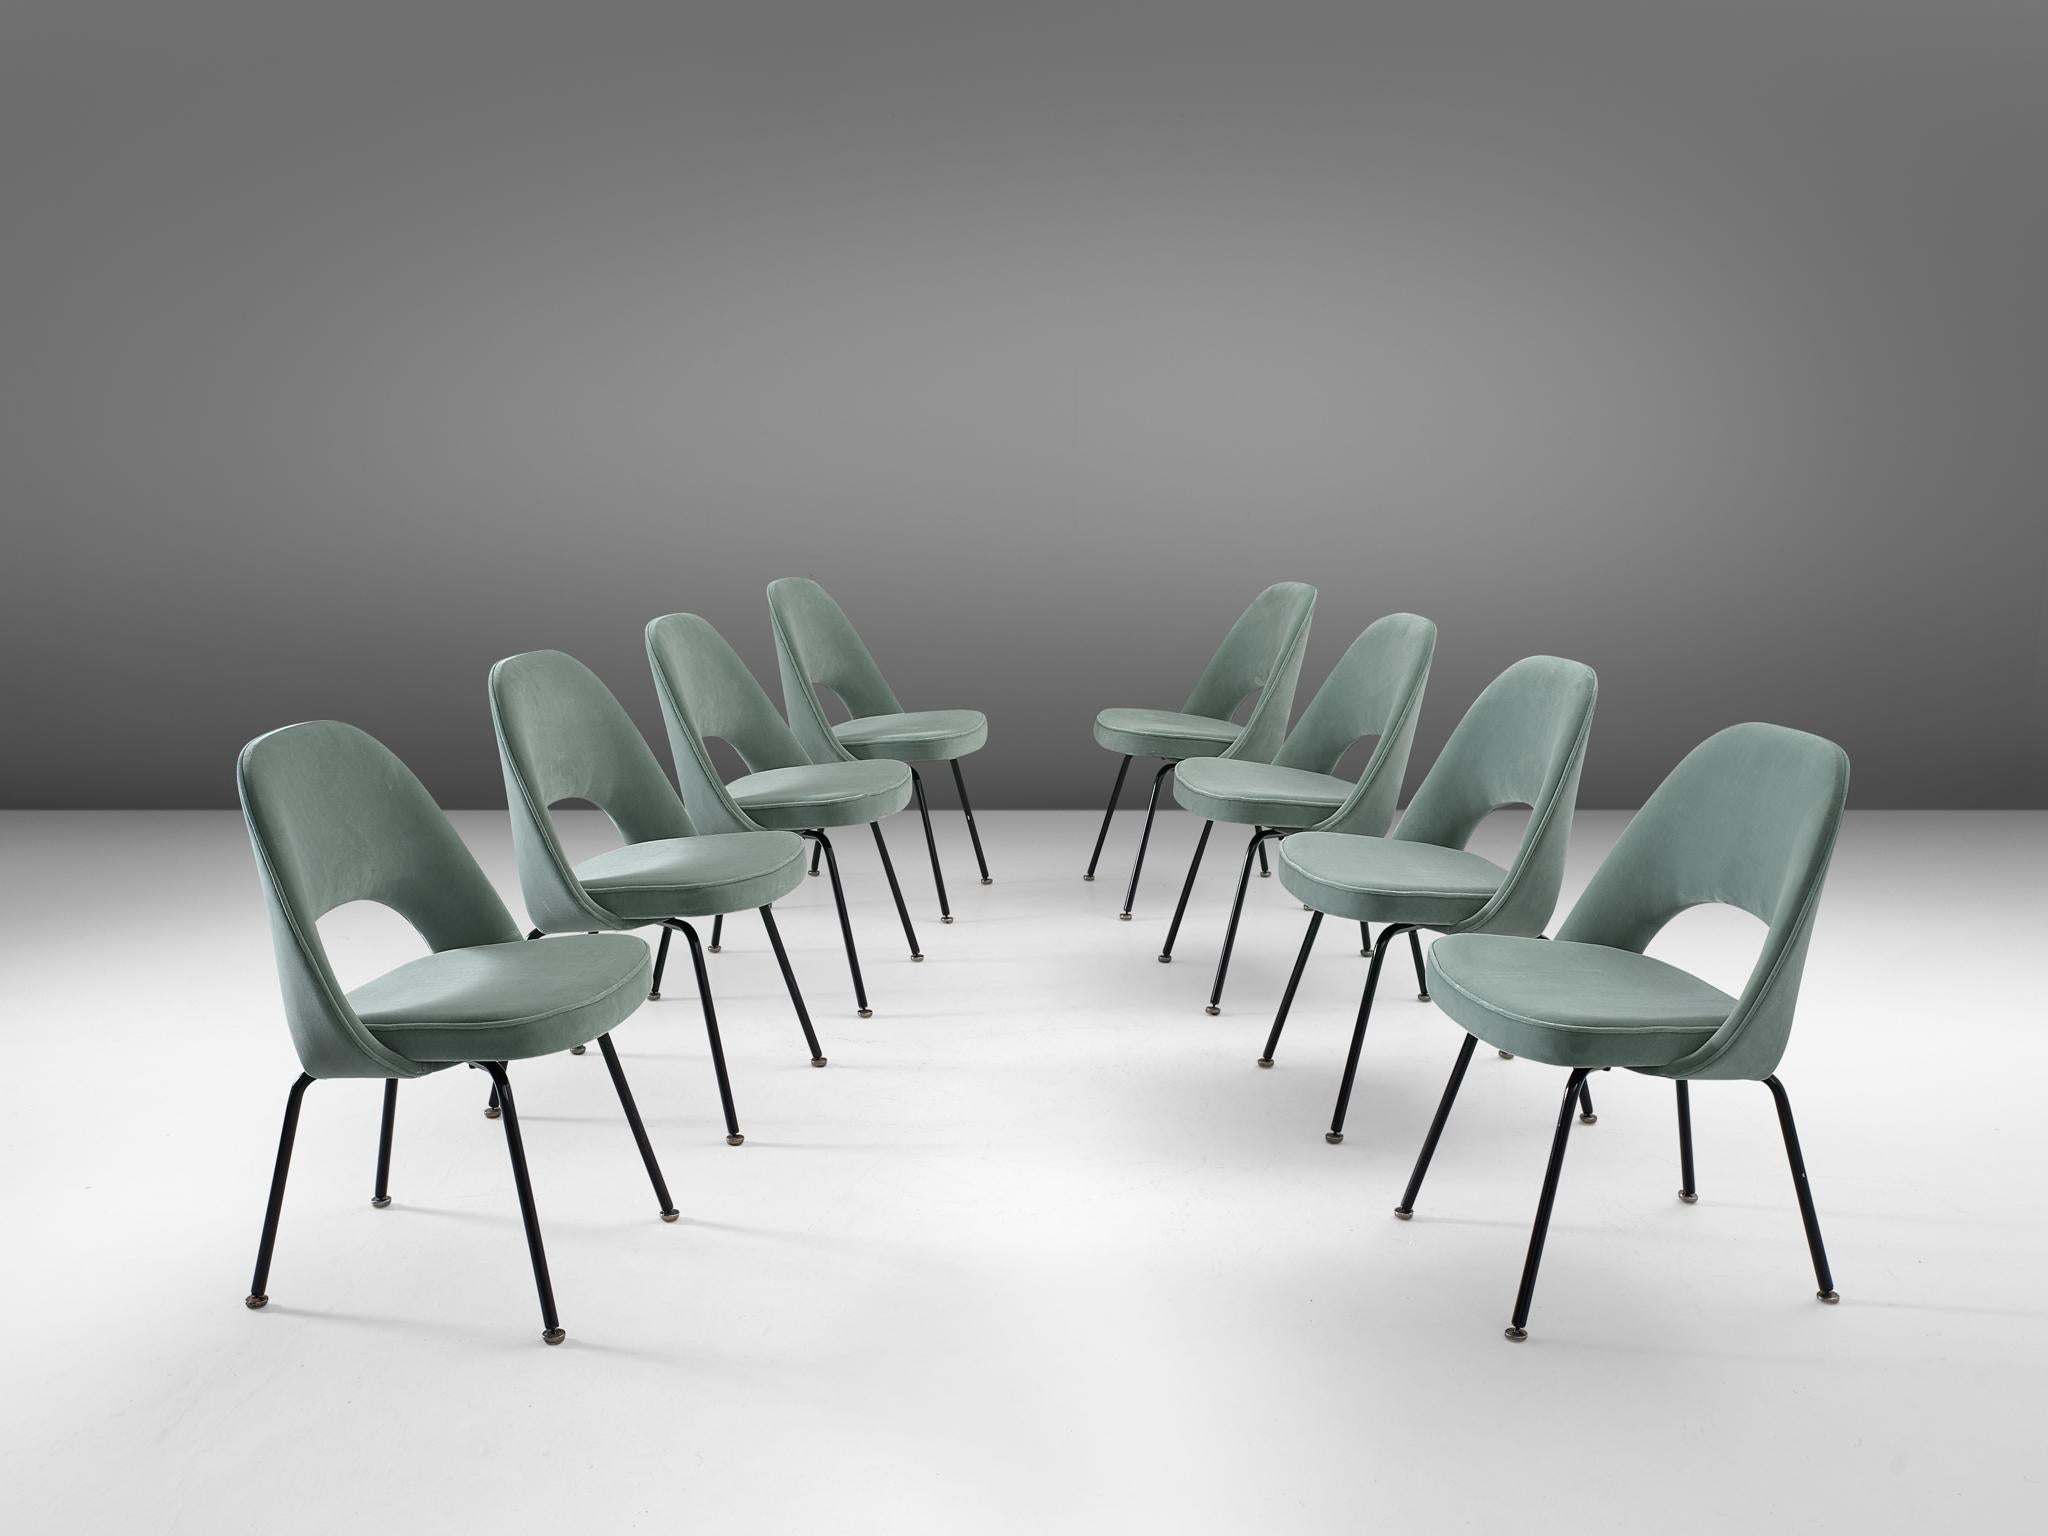 Eero Saarinen for Knoll International, set of eight chairs model 72, metal and turquoise velvet fabric, by United States, design 1948, later production.

Eight organic shaped chairs designed by Eero Saarinen. This iconic model is will be